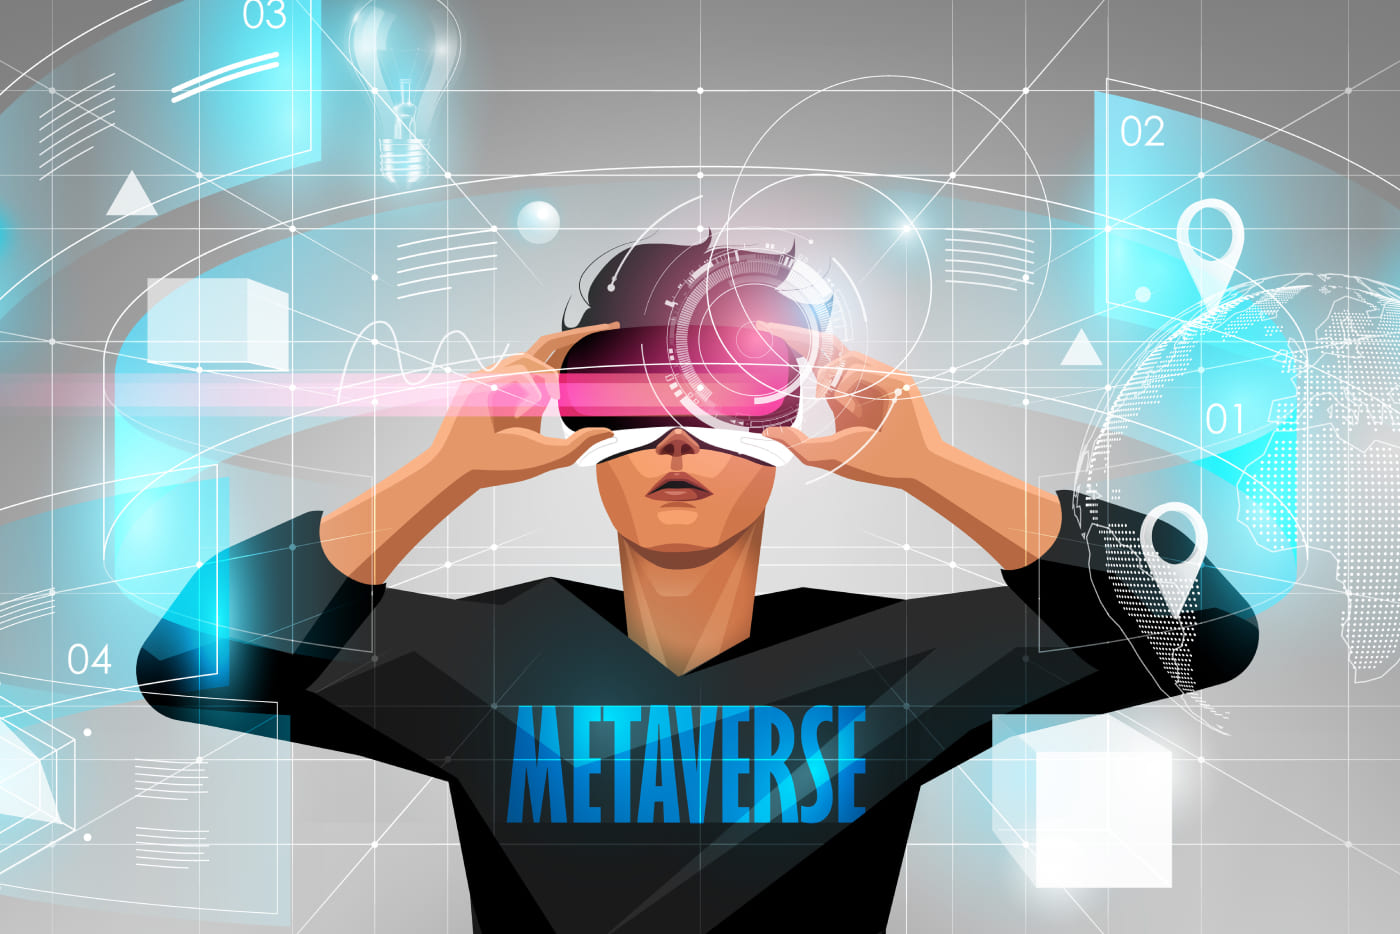 Top Roblox Creator Shares Metaverse Tips, Strategies, for Brands